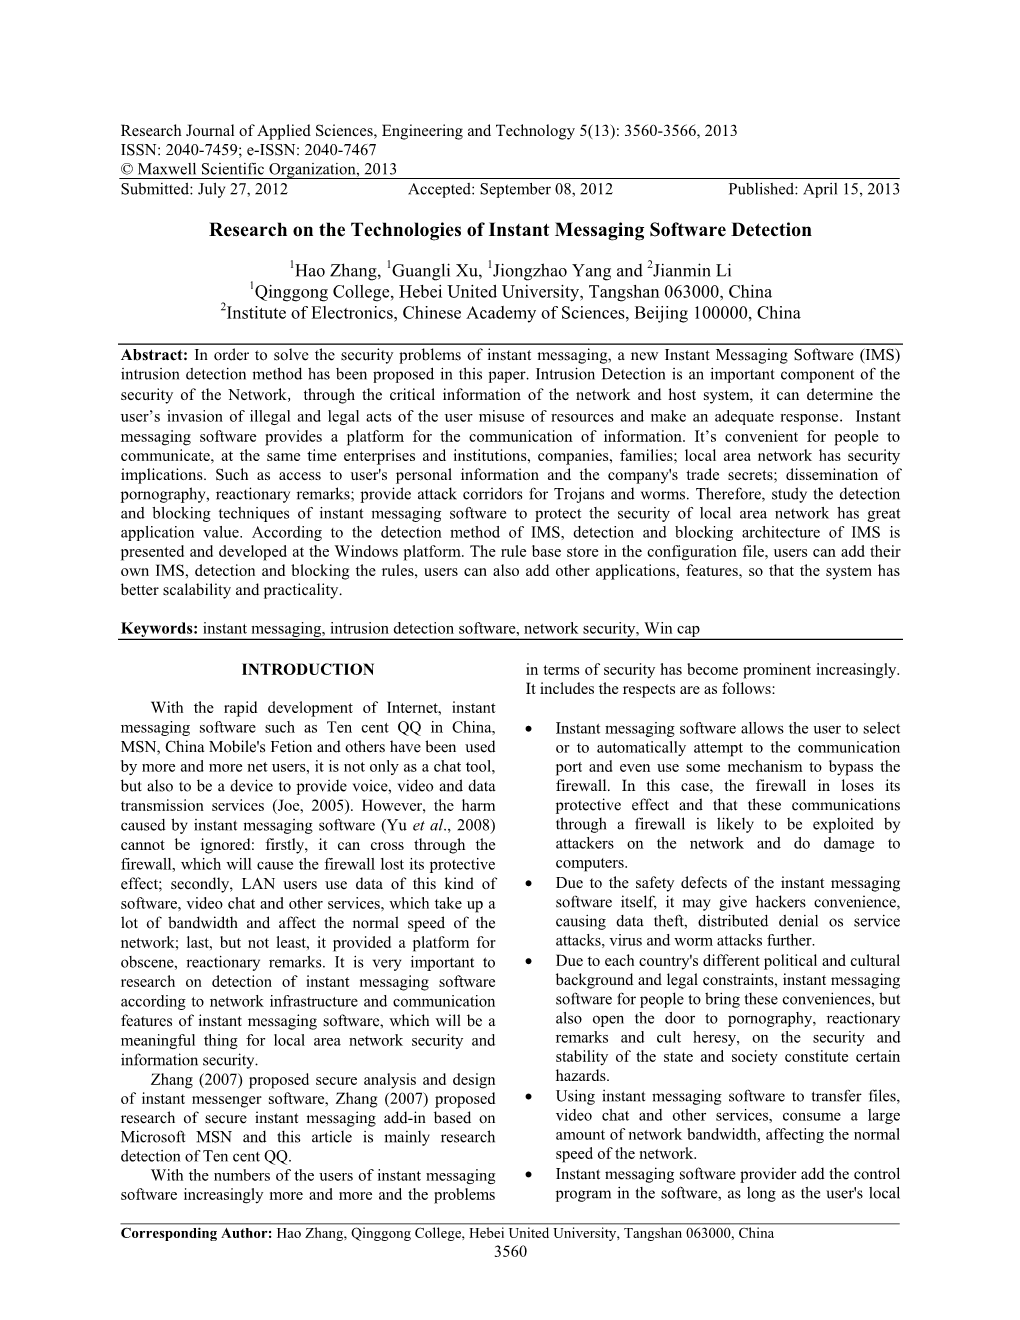 Research on the Technologies of Instant Messaging Software Detection